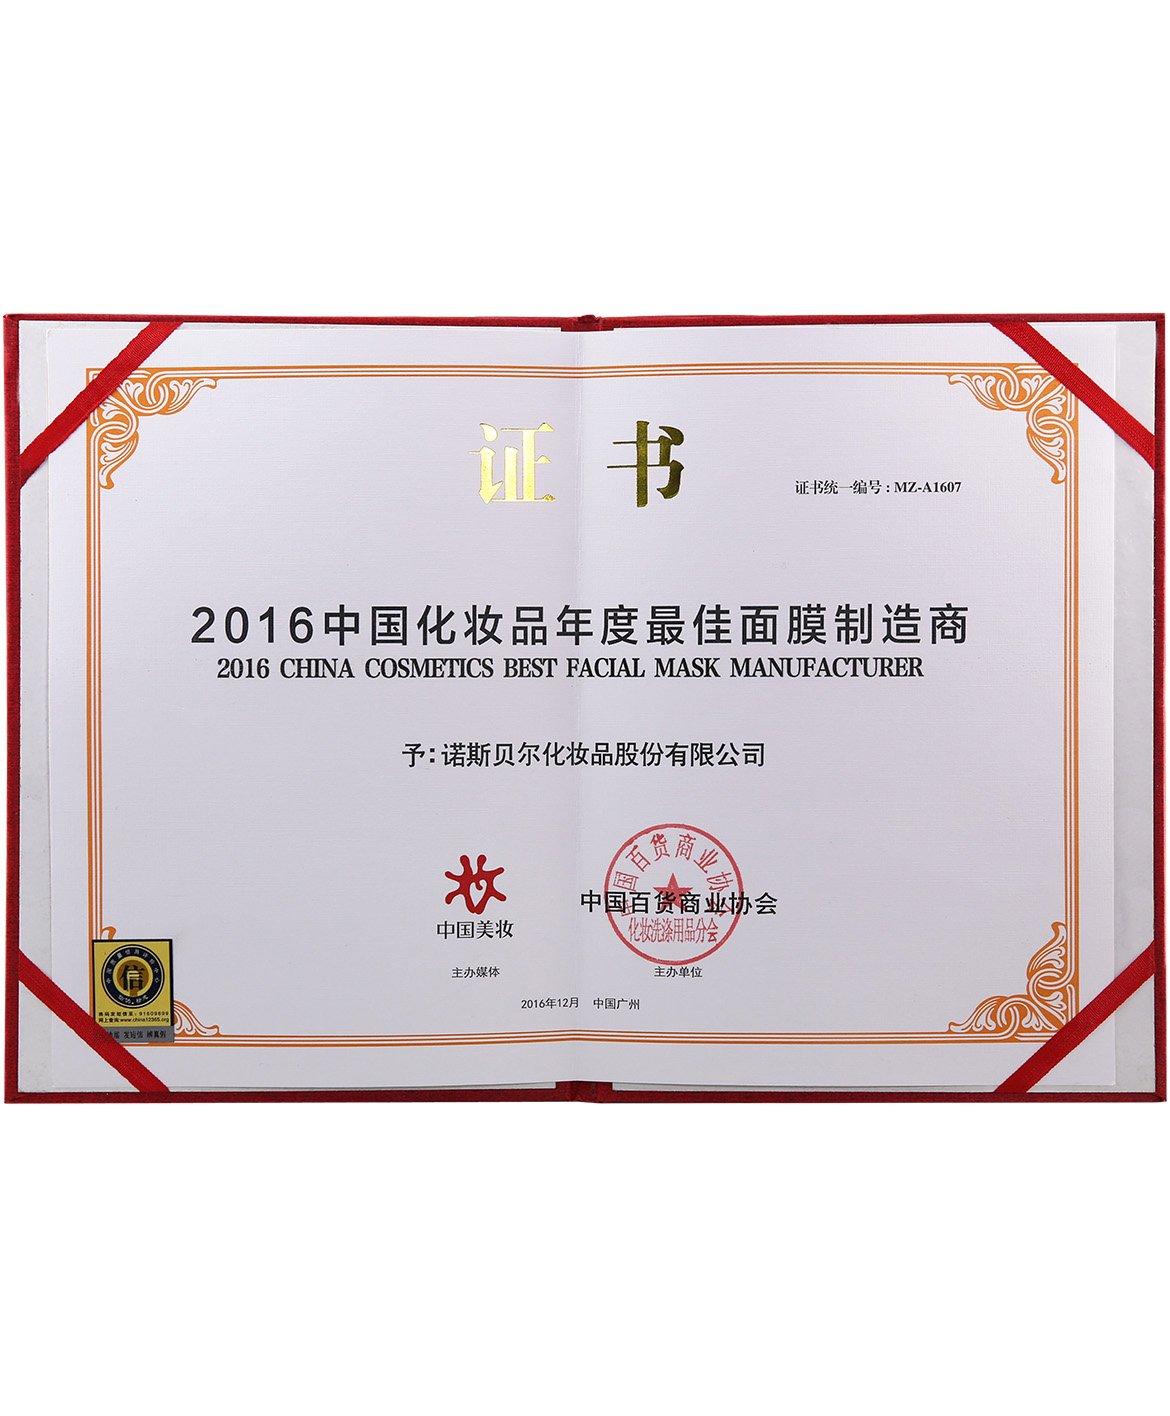 Best Mask Manufacturer in Cosmetics China 2016